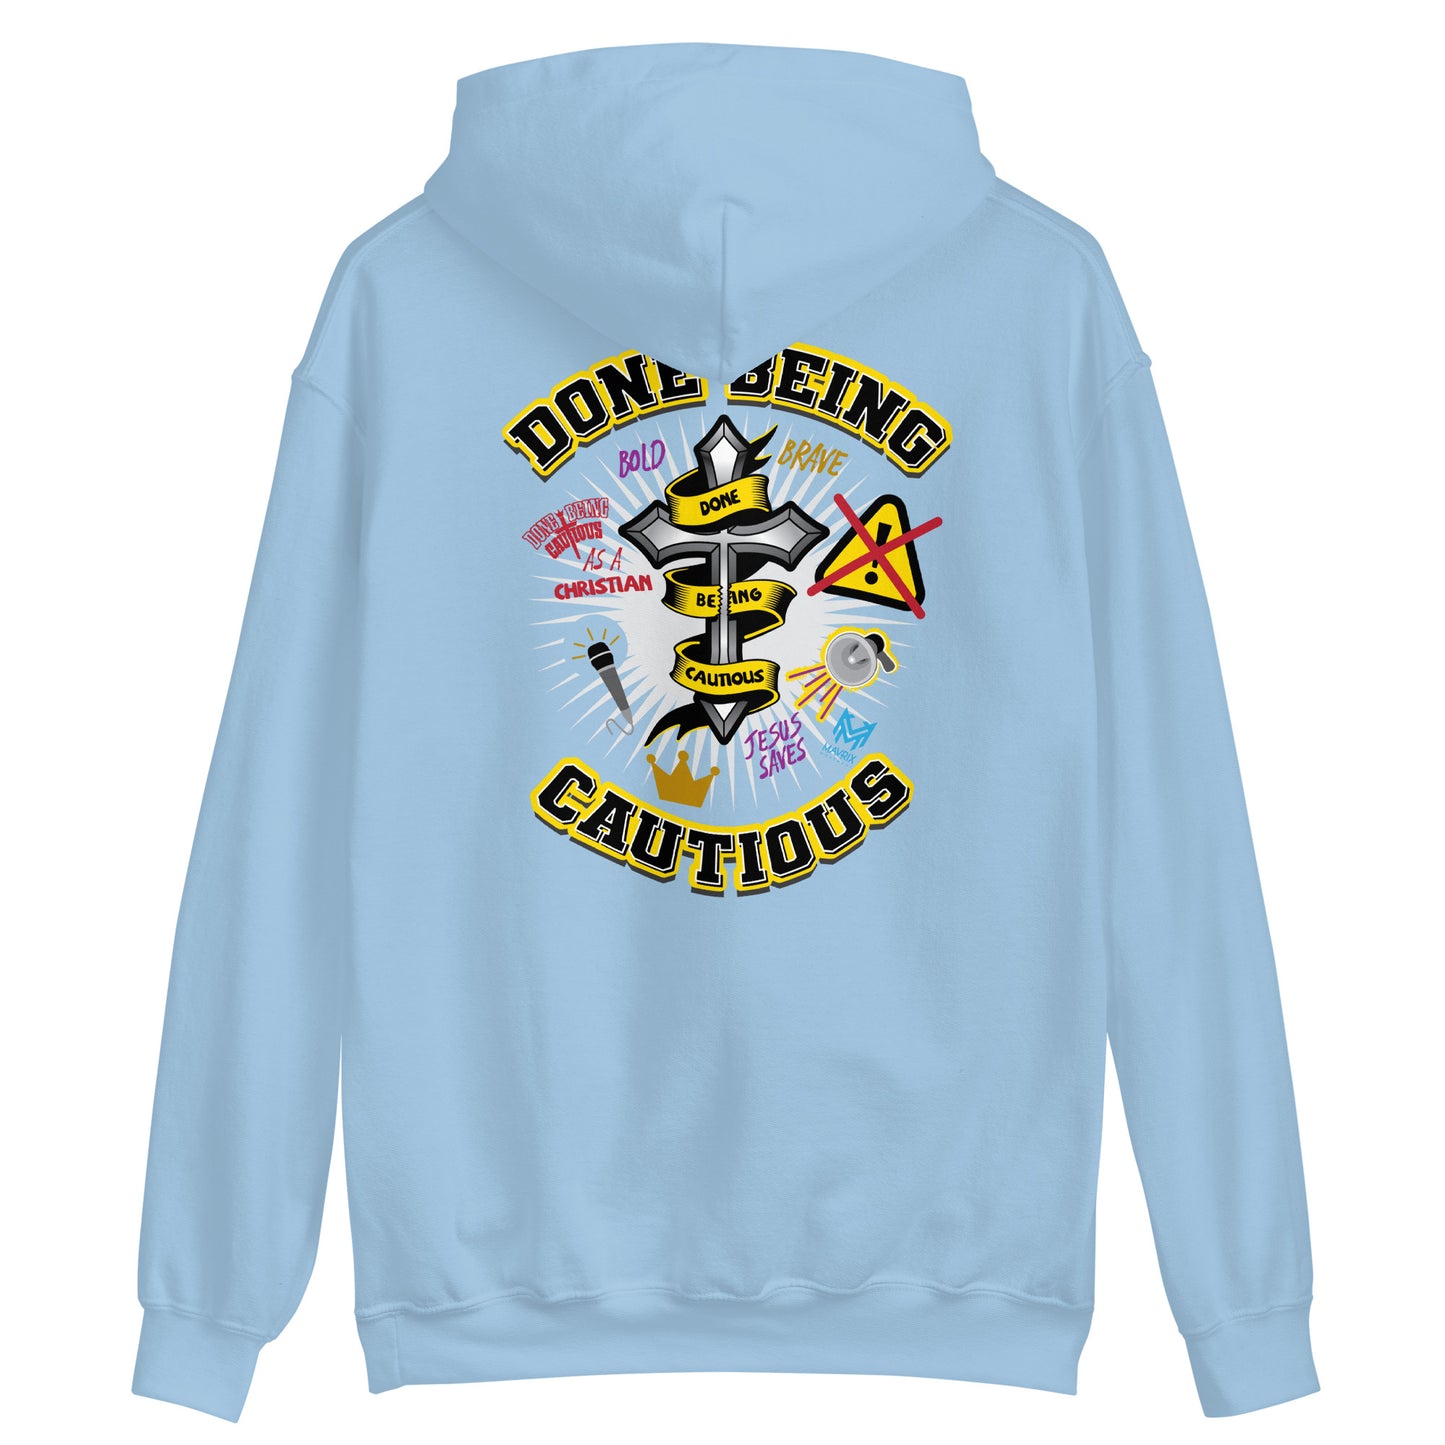 Done  Being Cautious - Cross Hoodie (7 colors)